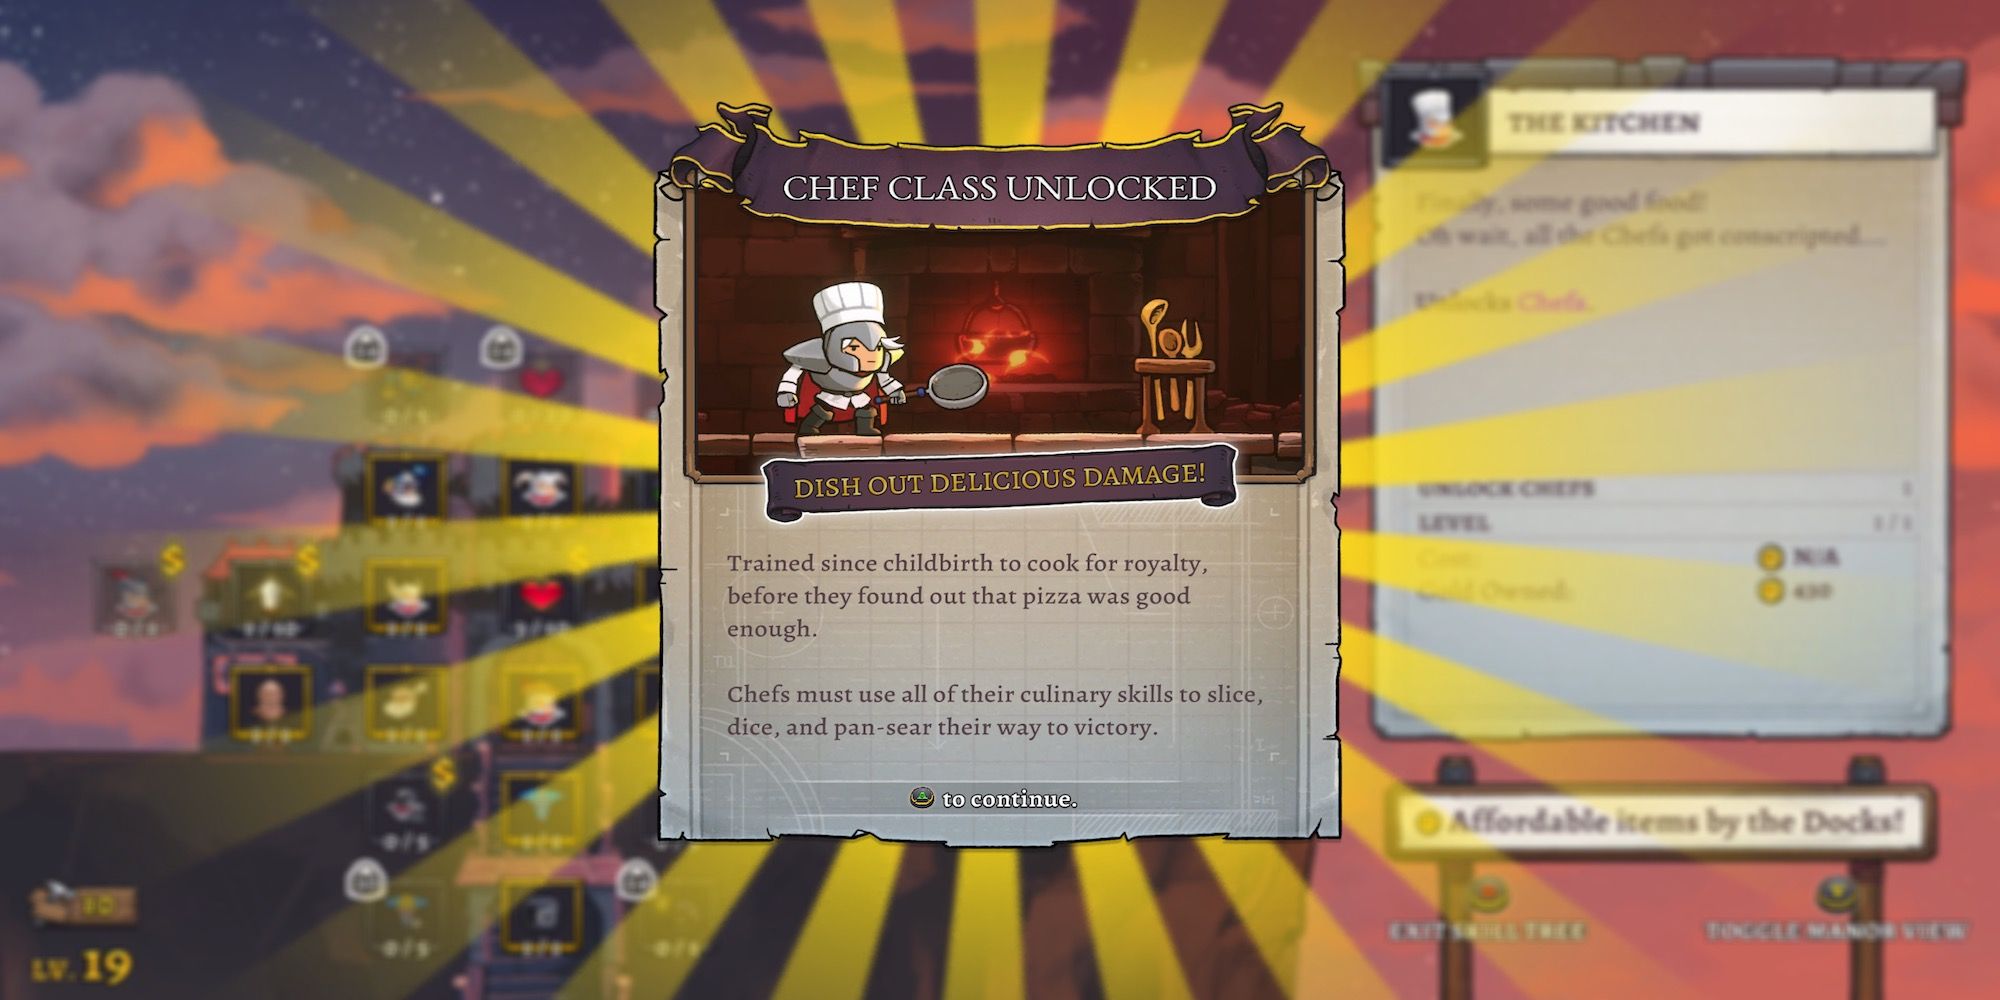 The Chef class in Rogue Legacy 2